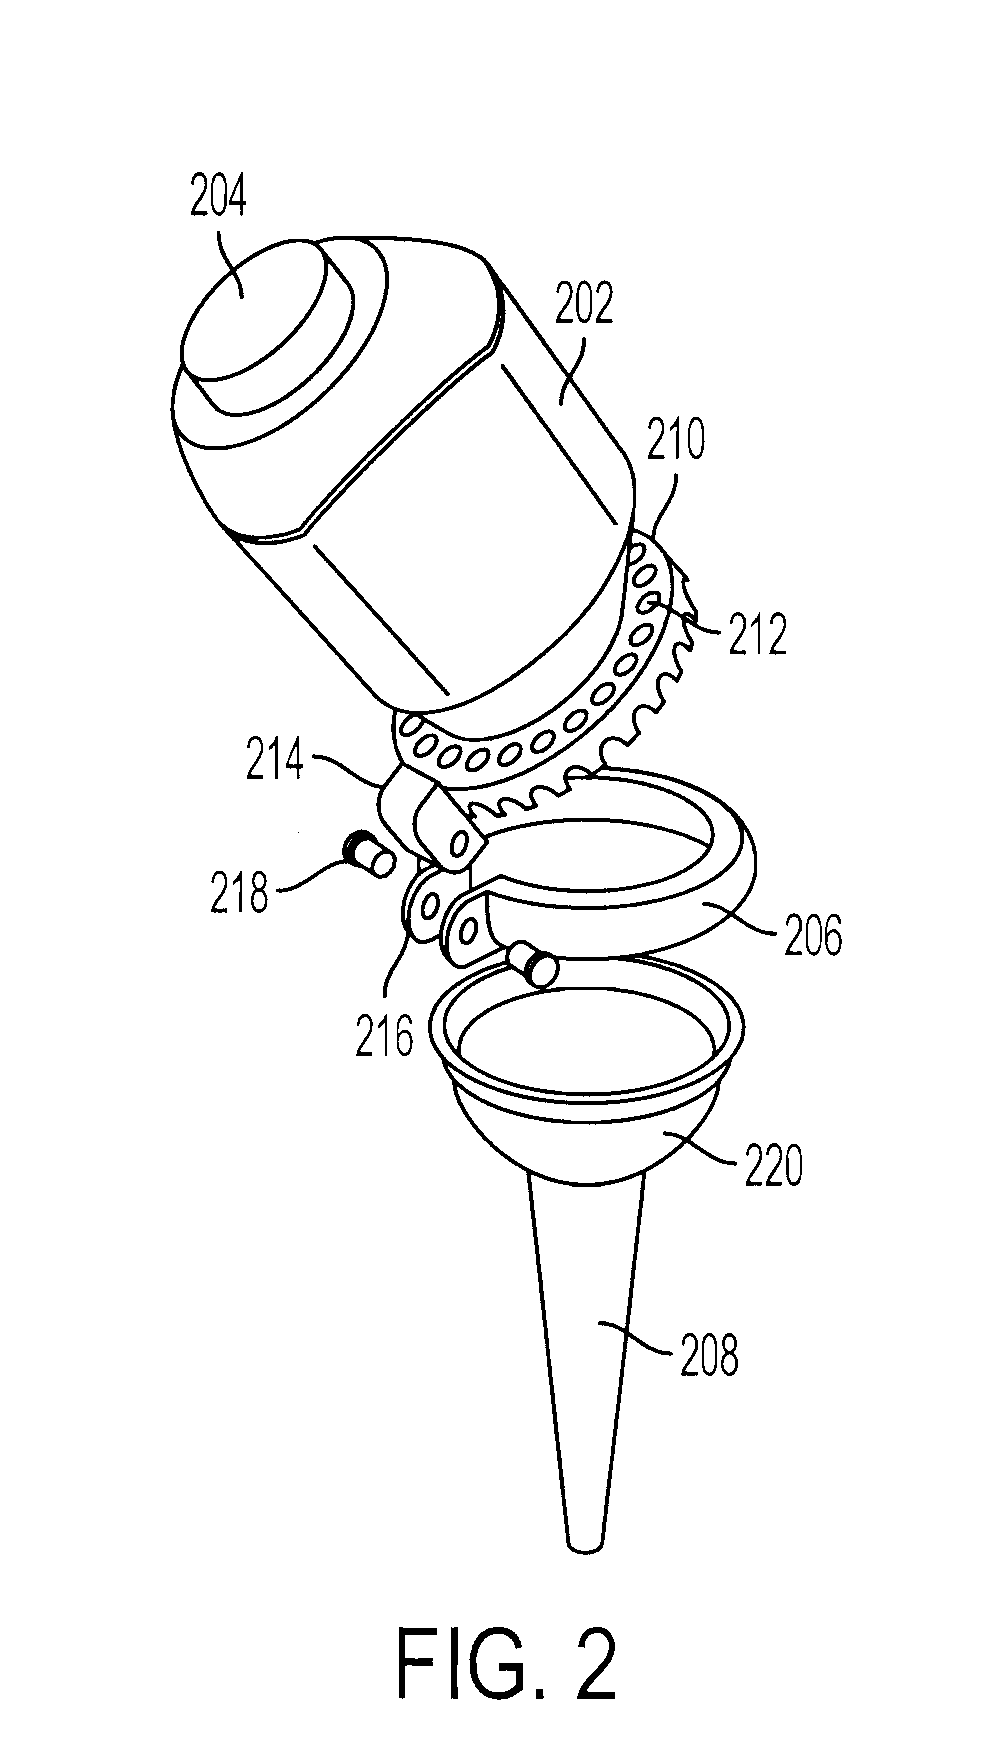 Smoking device using a laser diode as a source of ignition